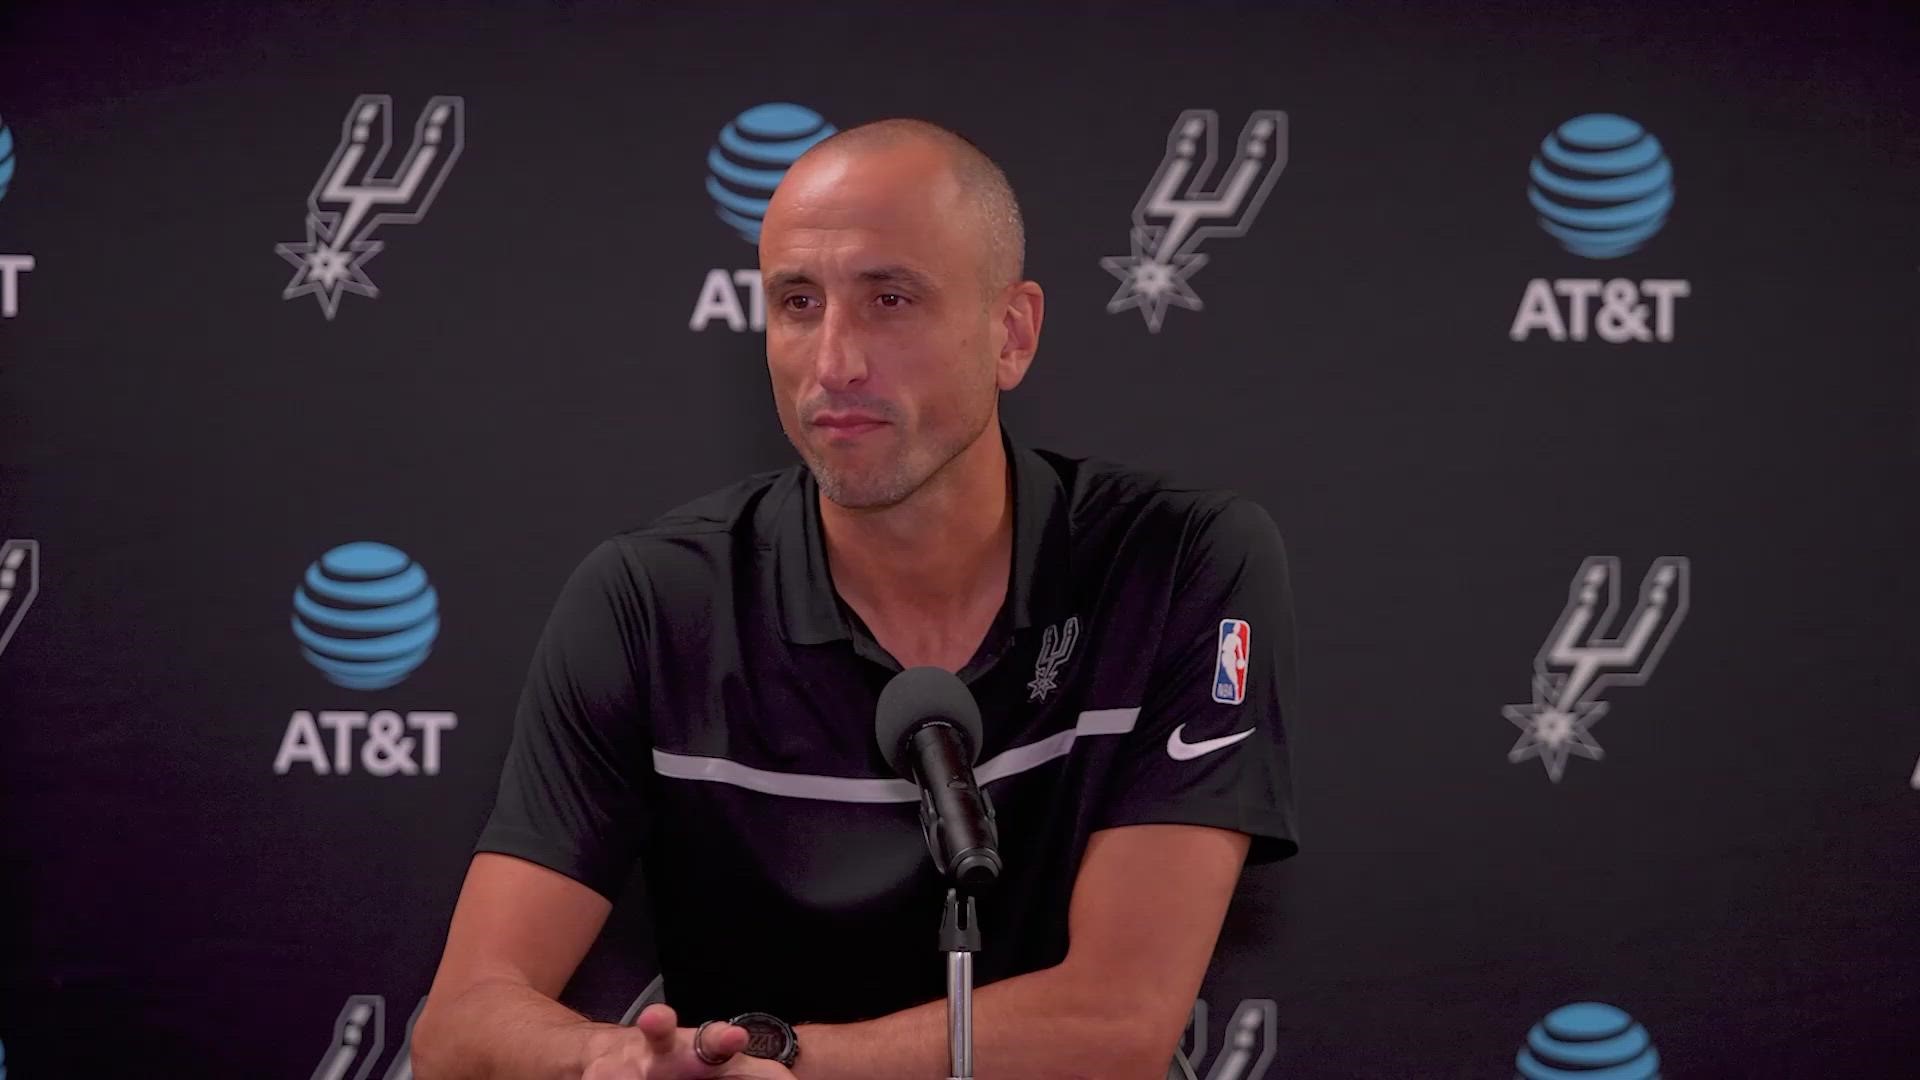 Ginobili said he tries to help anyone who asks, but it's hard to explain a move that is so natural for him.